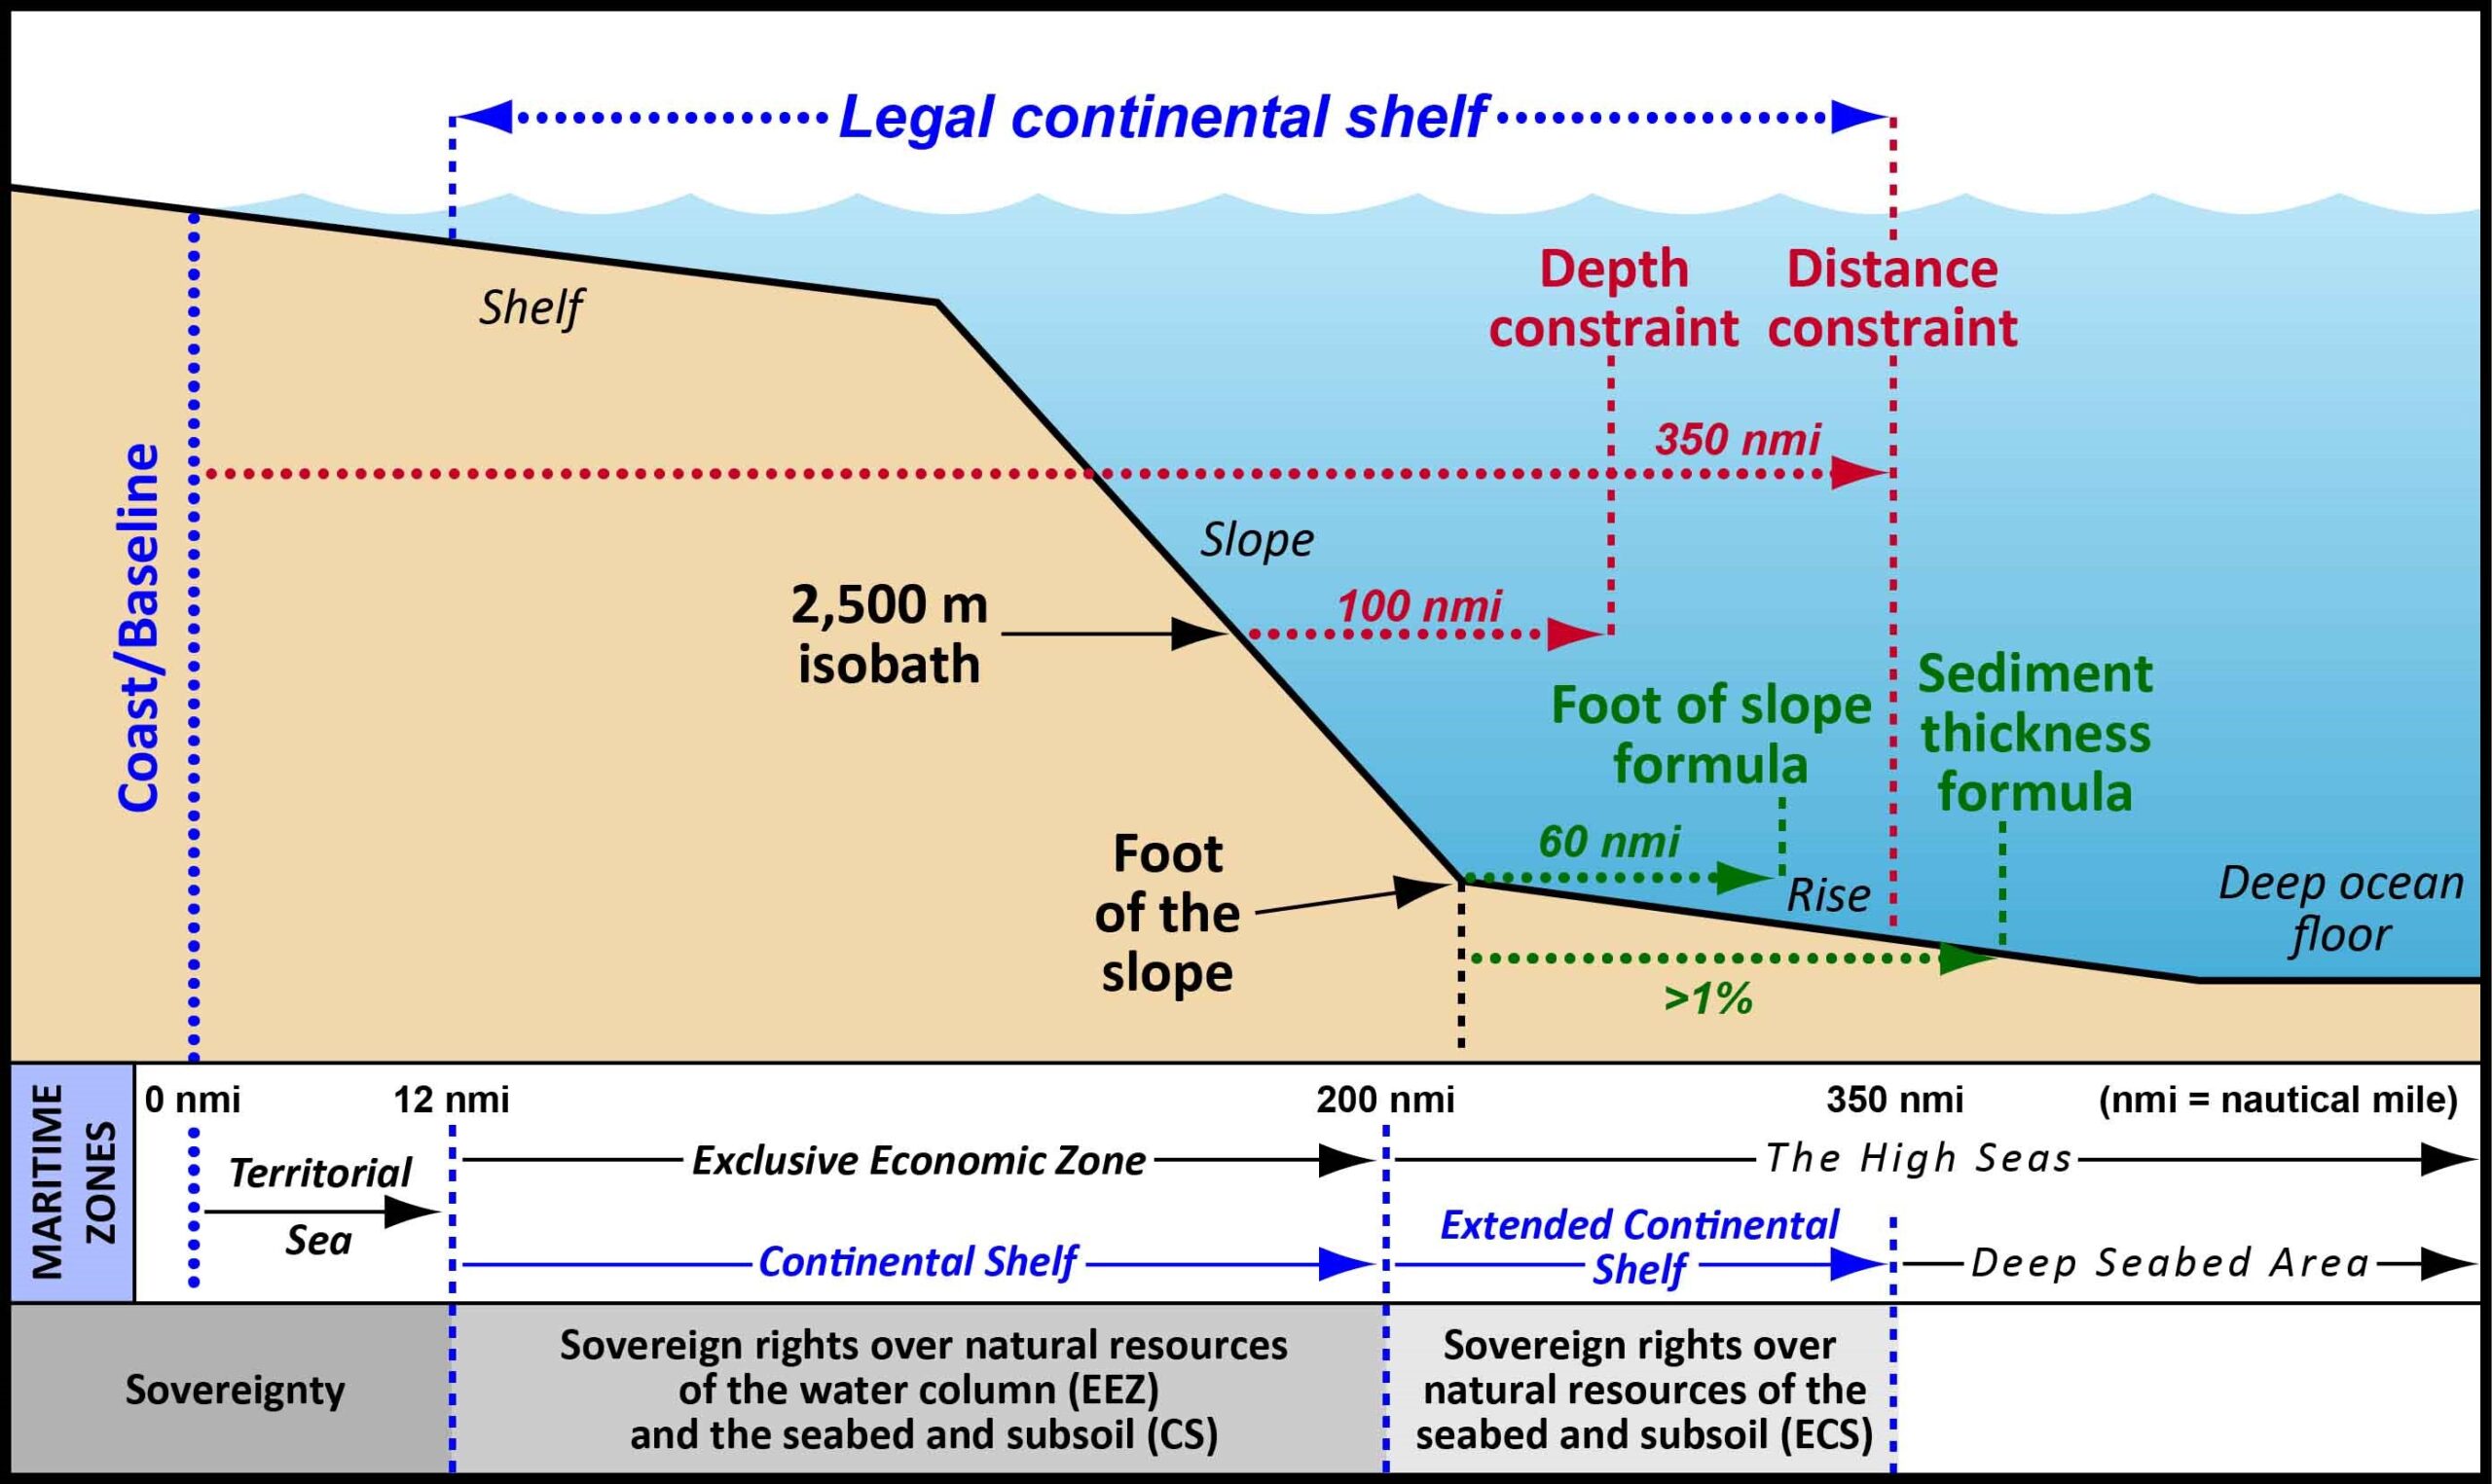 Procedures to Establish the Outer Limits of the Continental Shelf on the law of the sea and LOSC